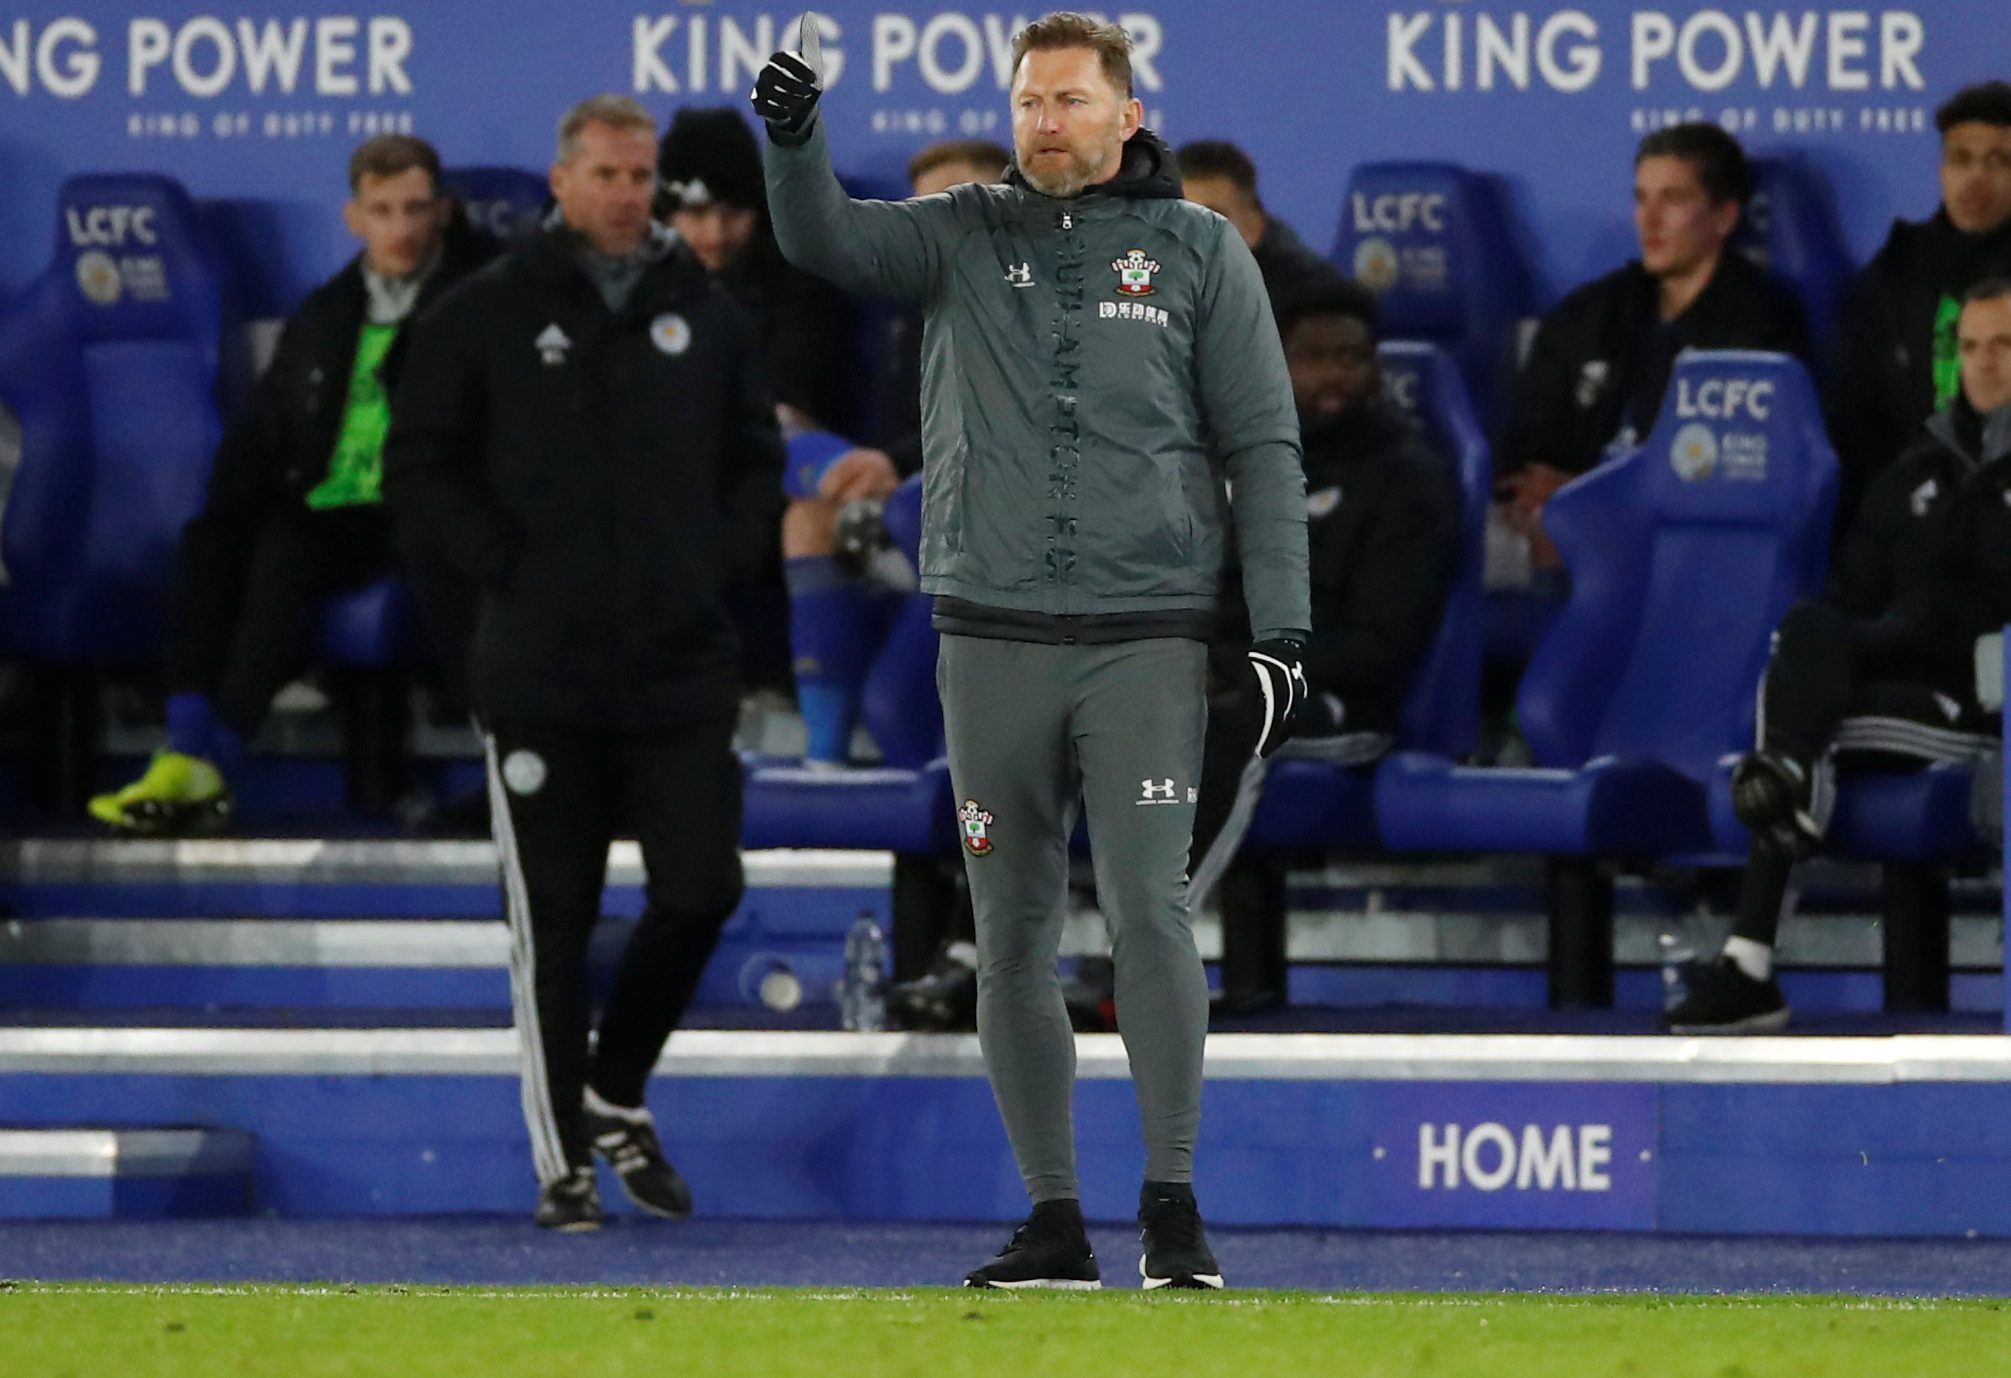 Soccer Football - Premier League - Leicester City v Southampton - King Power Stadium, Leicester, Britain - January 11, 2020  Southampton manager Ralph Hasenhuttl reacts  Action Images via Reuters/Andrew Boyers  EDITORIAL USE ONLY. No use with unauthorized audio, video, data, fixture lists, club/league logos or 